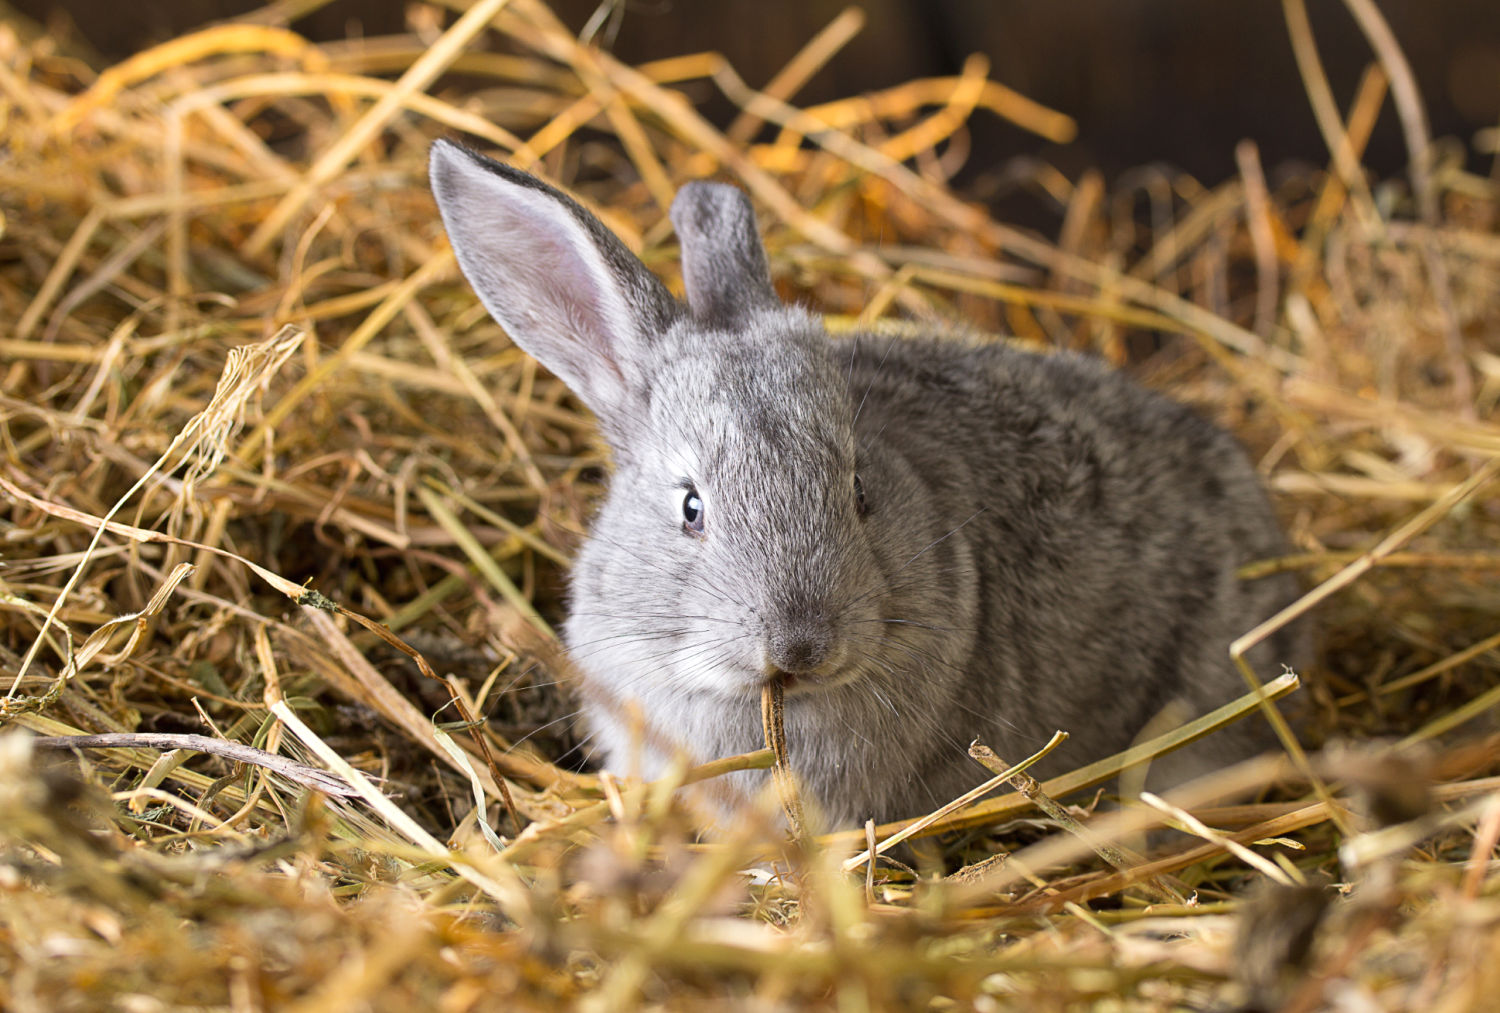 Grey rabbit sitting on straw in a hutch - the city farms are a great free day out in London with kids